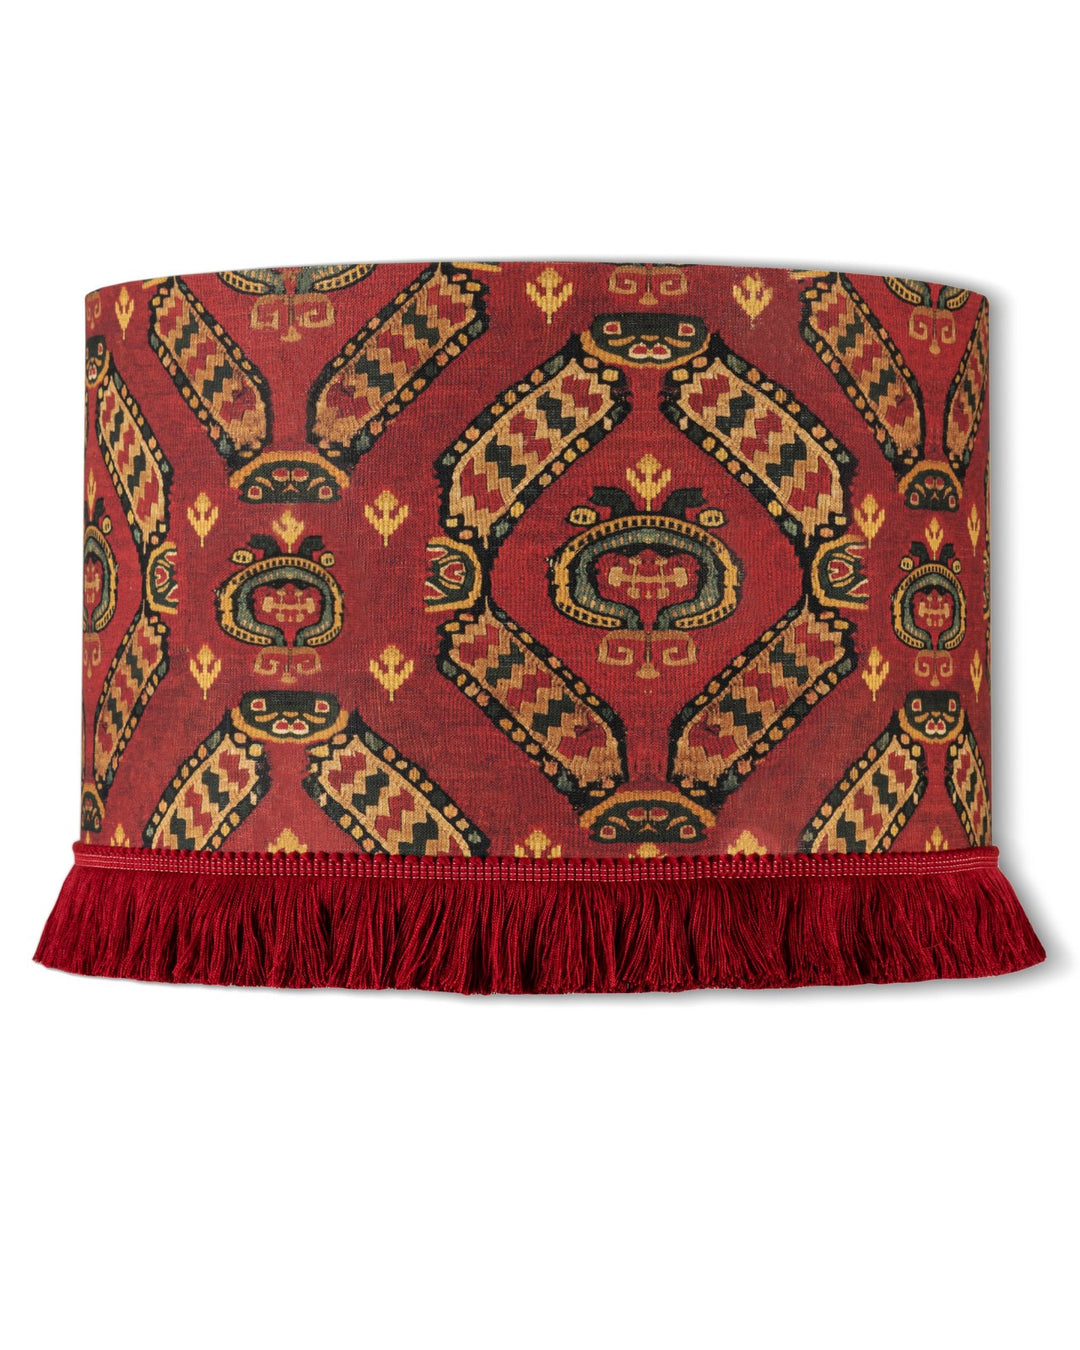 Mind-the-gap-tyrol-collection-roverto-red-linen-friged-detail-drum-standard-lamp-shade-apres-ski-alpine-chalet-cabin-